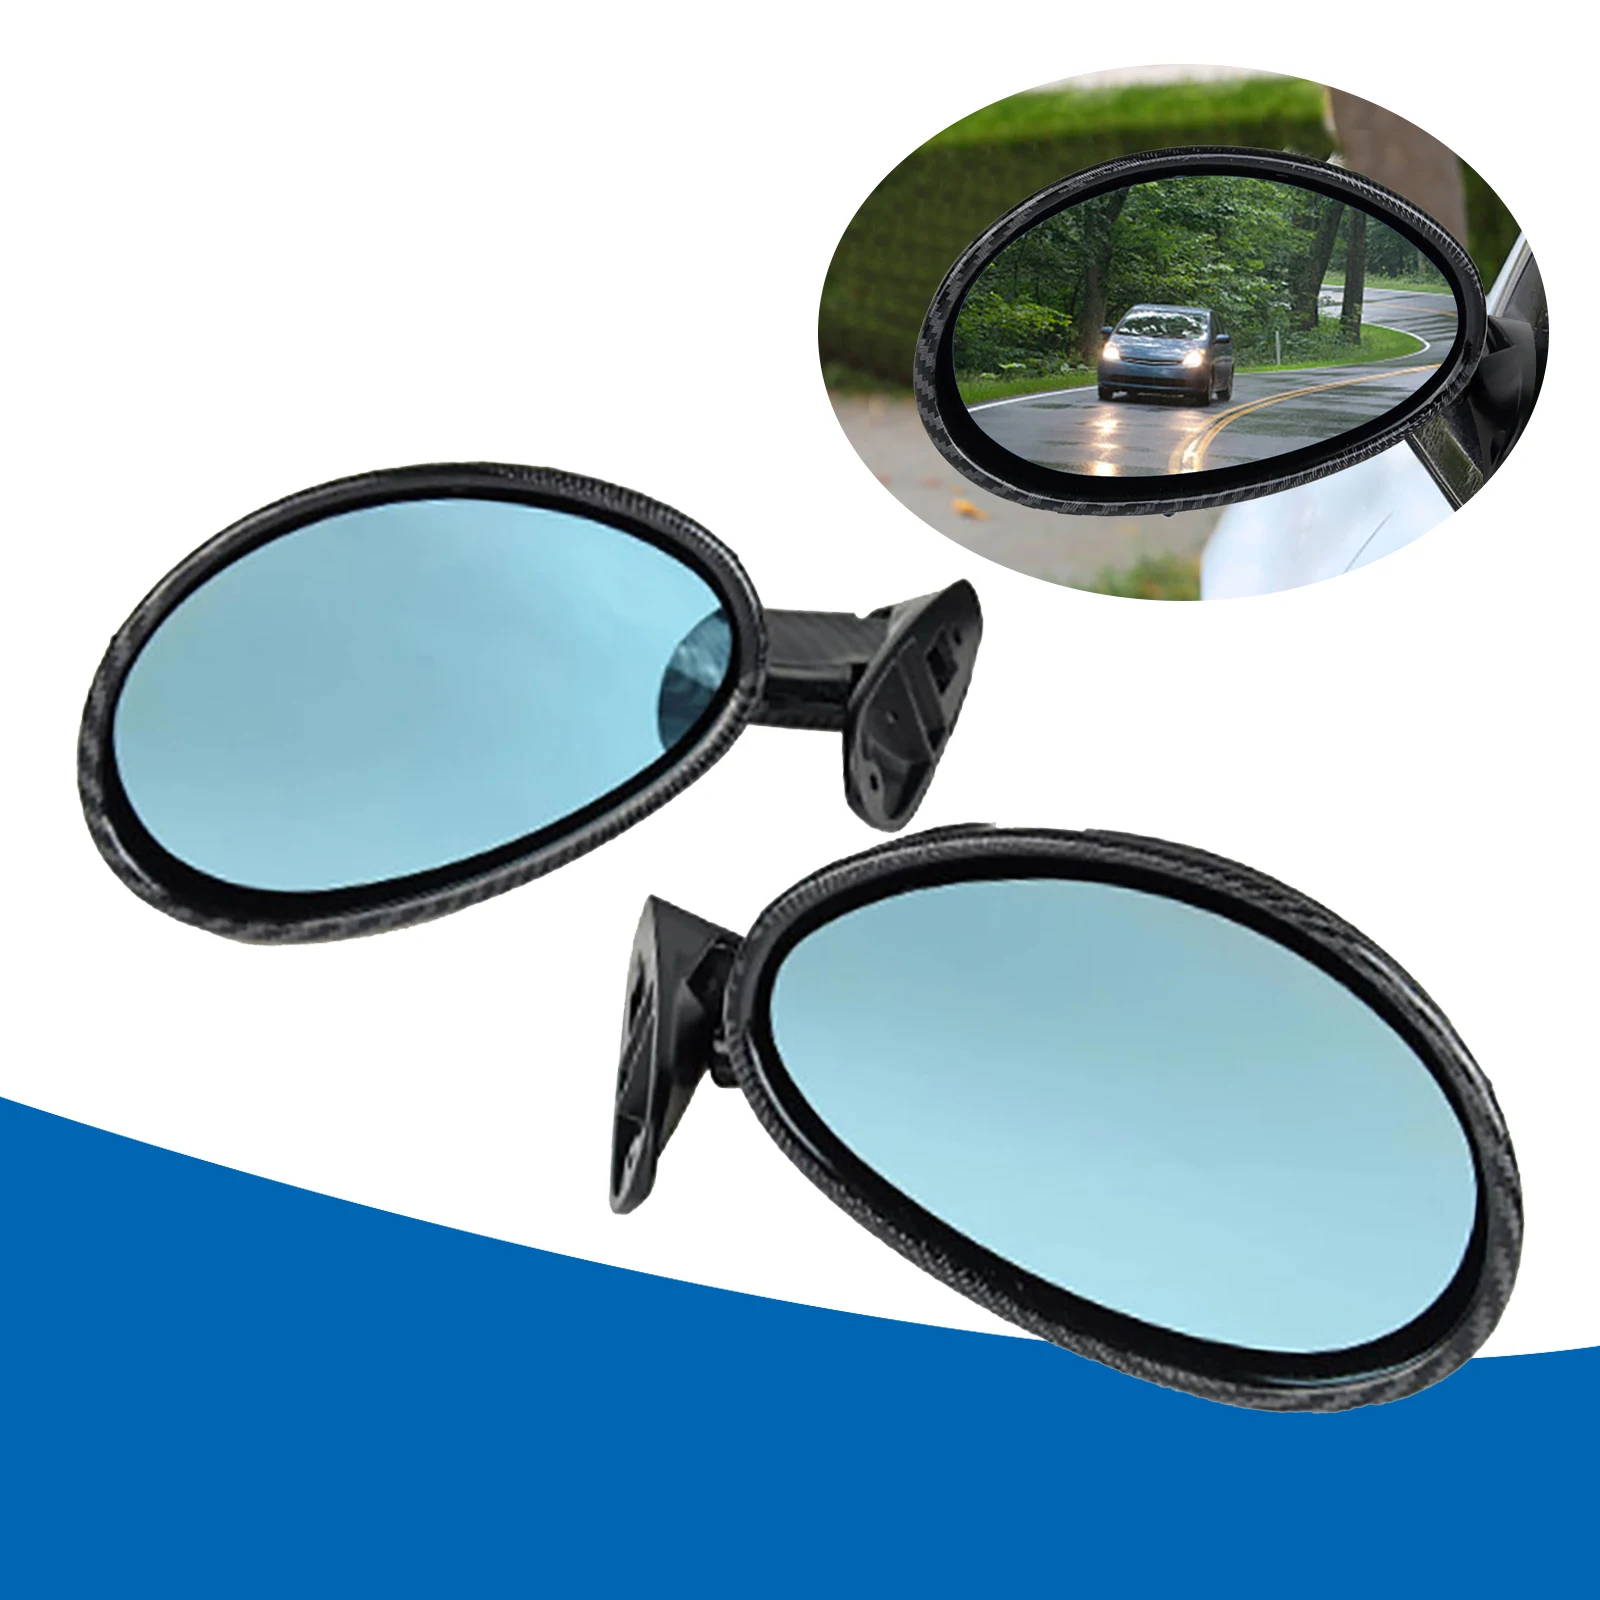 2pcs-universal-f1-style-wing-rear-view-mirrors-carbon-fiber-look-car-racing-rearview-side-wing-mirrors